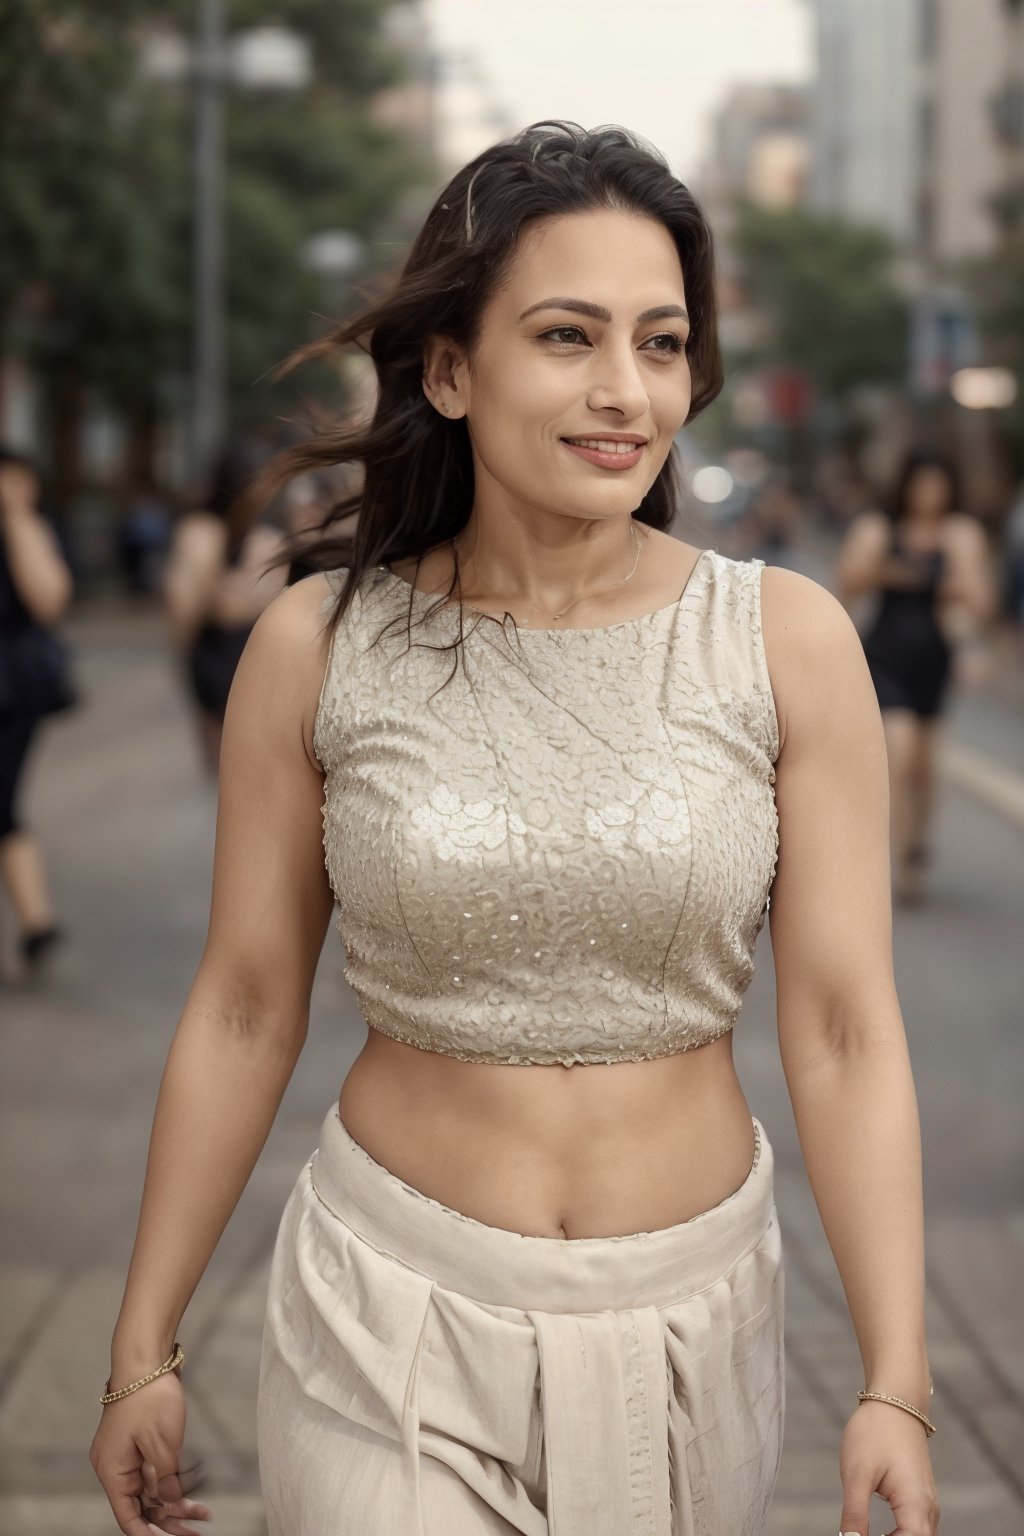 A 38-year-old stunning woman walks alone down a bustling city street, her toned midriff visible beneath a fitted white tank top as she confidently strides forward. The warm sunlight casts a flattering glow on her features, highlighting the curve of her smile and the sparkle in her eyes. The urban landscape blends into a blurred background, emphasizing the subject's striking presence.,T shape navel 